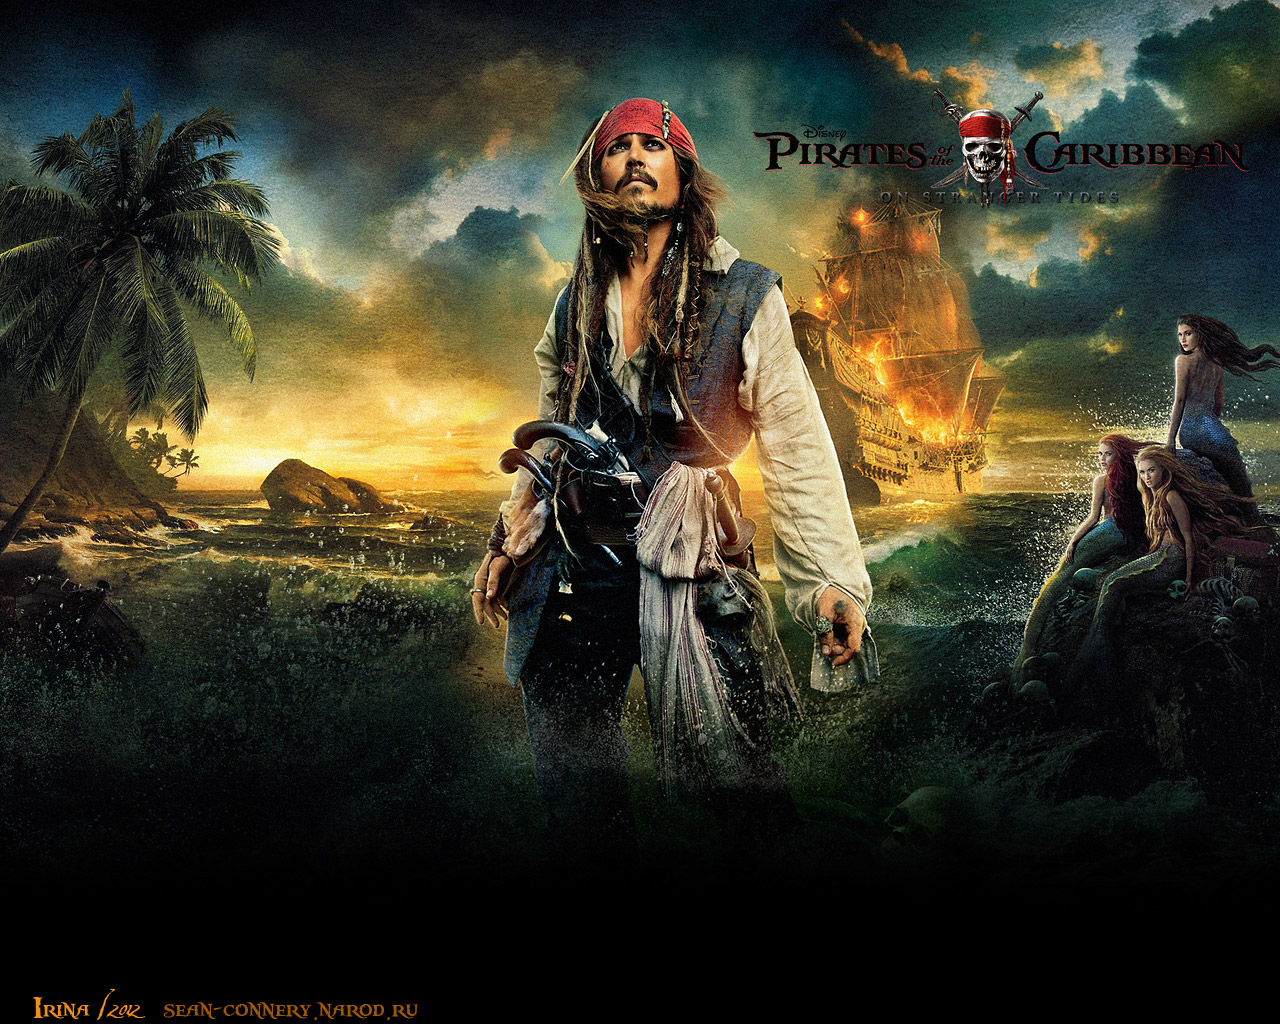 Pirates of the Caribbean images POTC wallpapers wallpaper photos